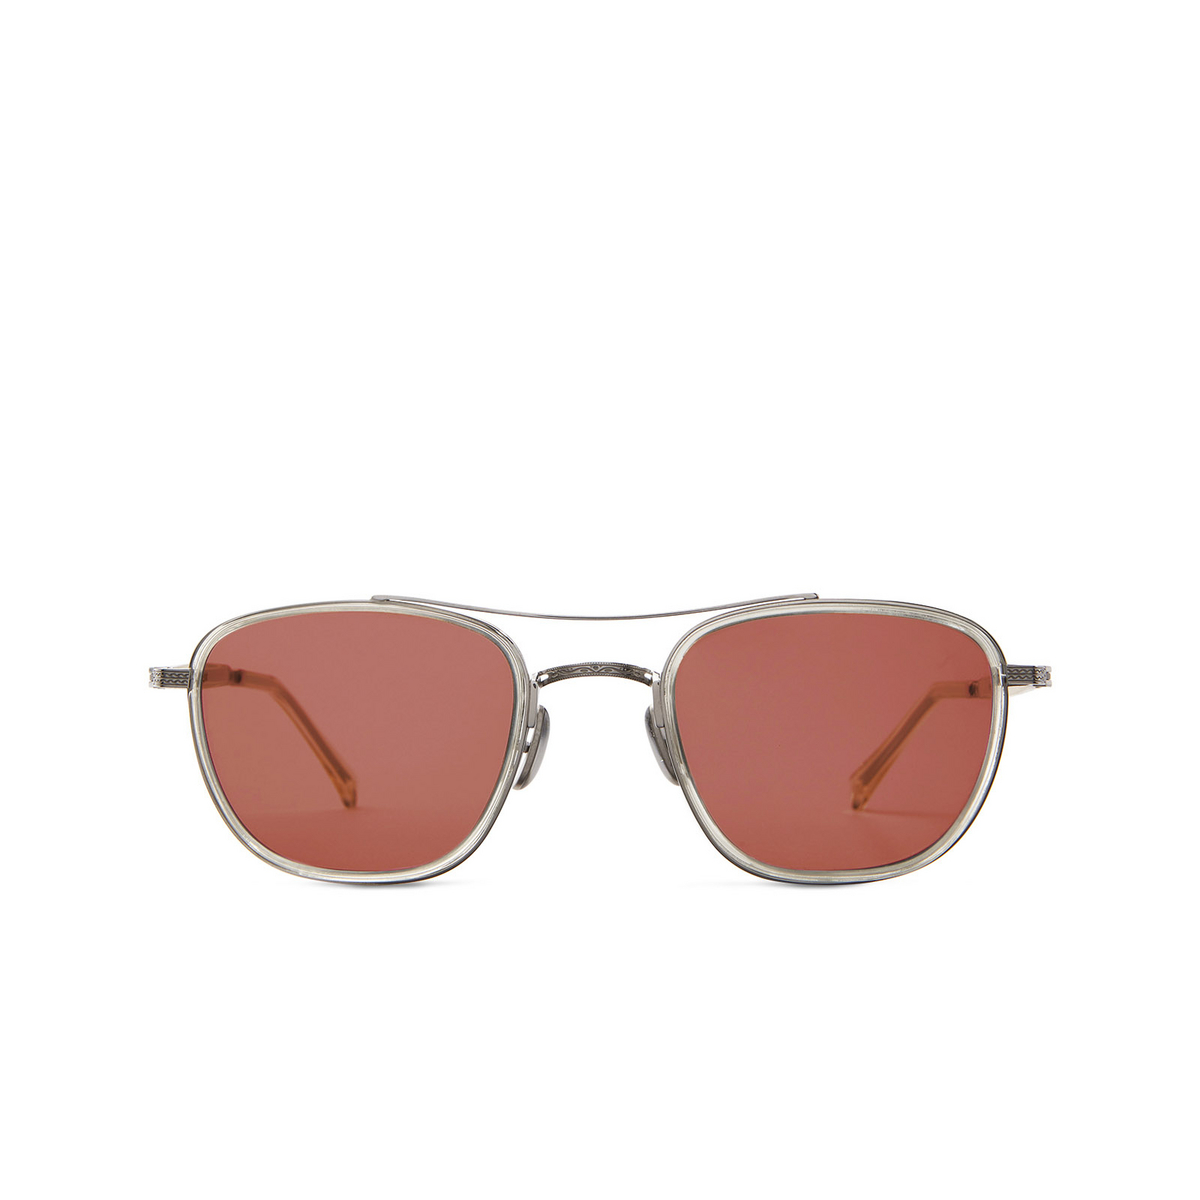 Mr. Leight PRICE S Sunglasses ARTCRY-PLT/PRW Artist Crystal-Platinum/Pure Rosewood - front view